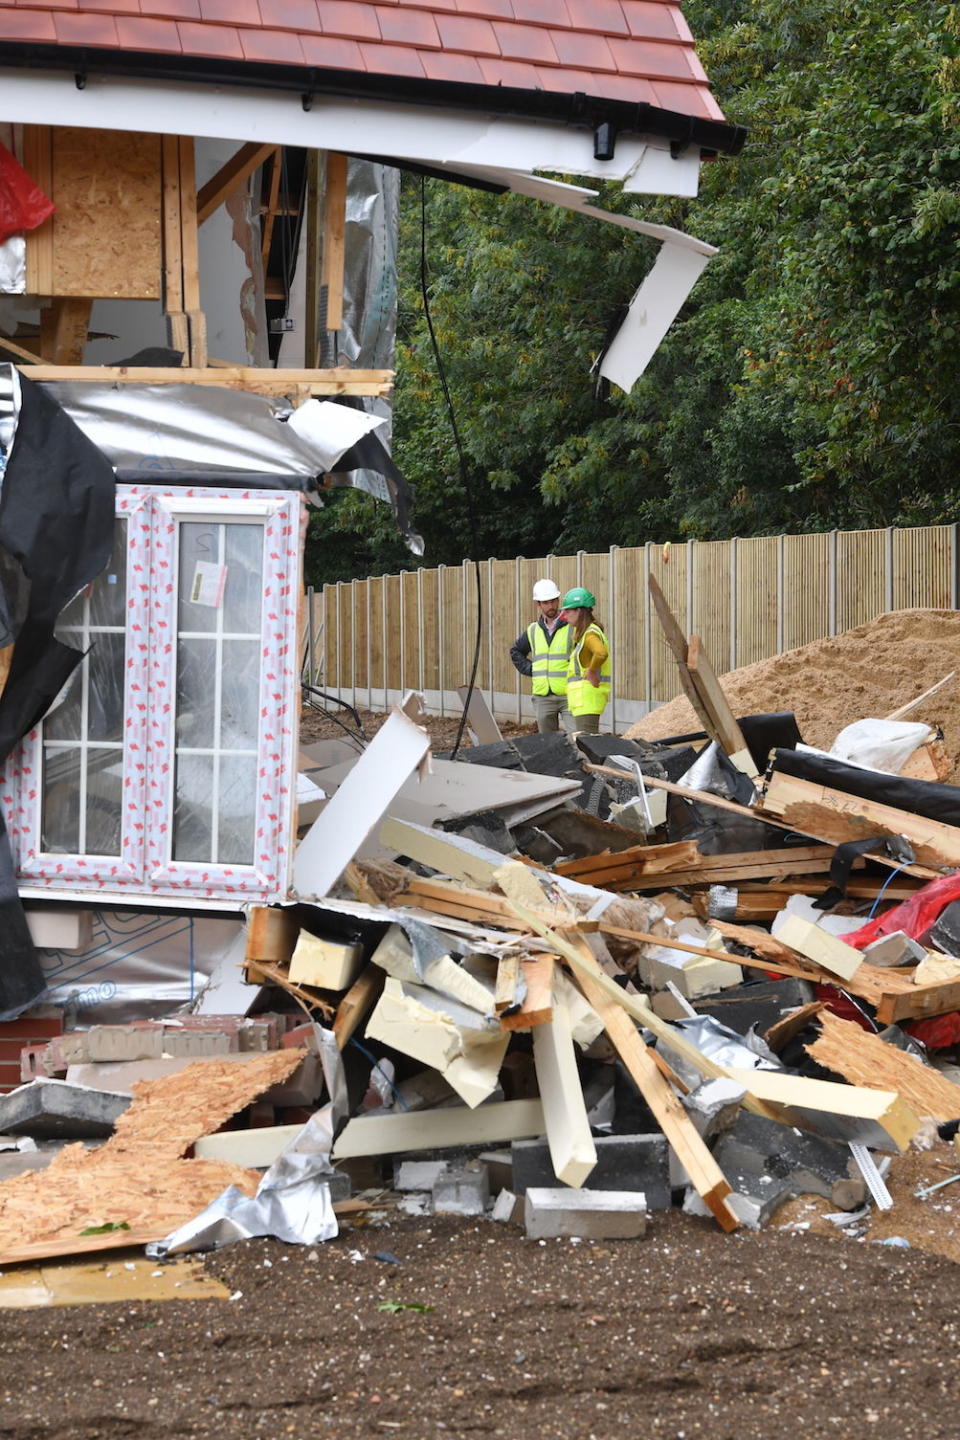 People inspect damaged properties in a row of newly-built retirement homes in Ermine Street in Buntingford, Hertfordshire (Picture: PA)